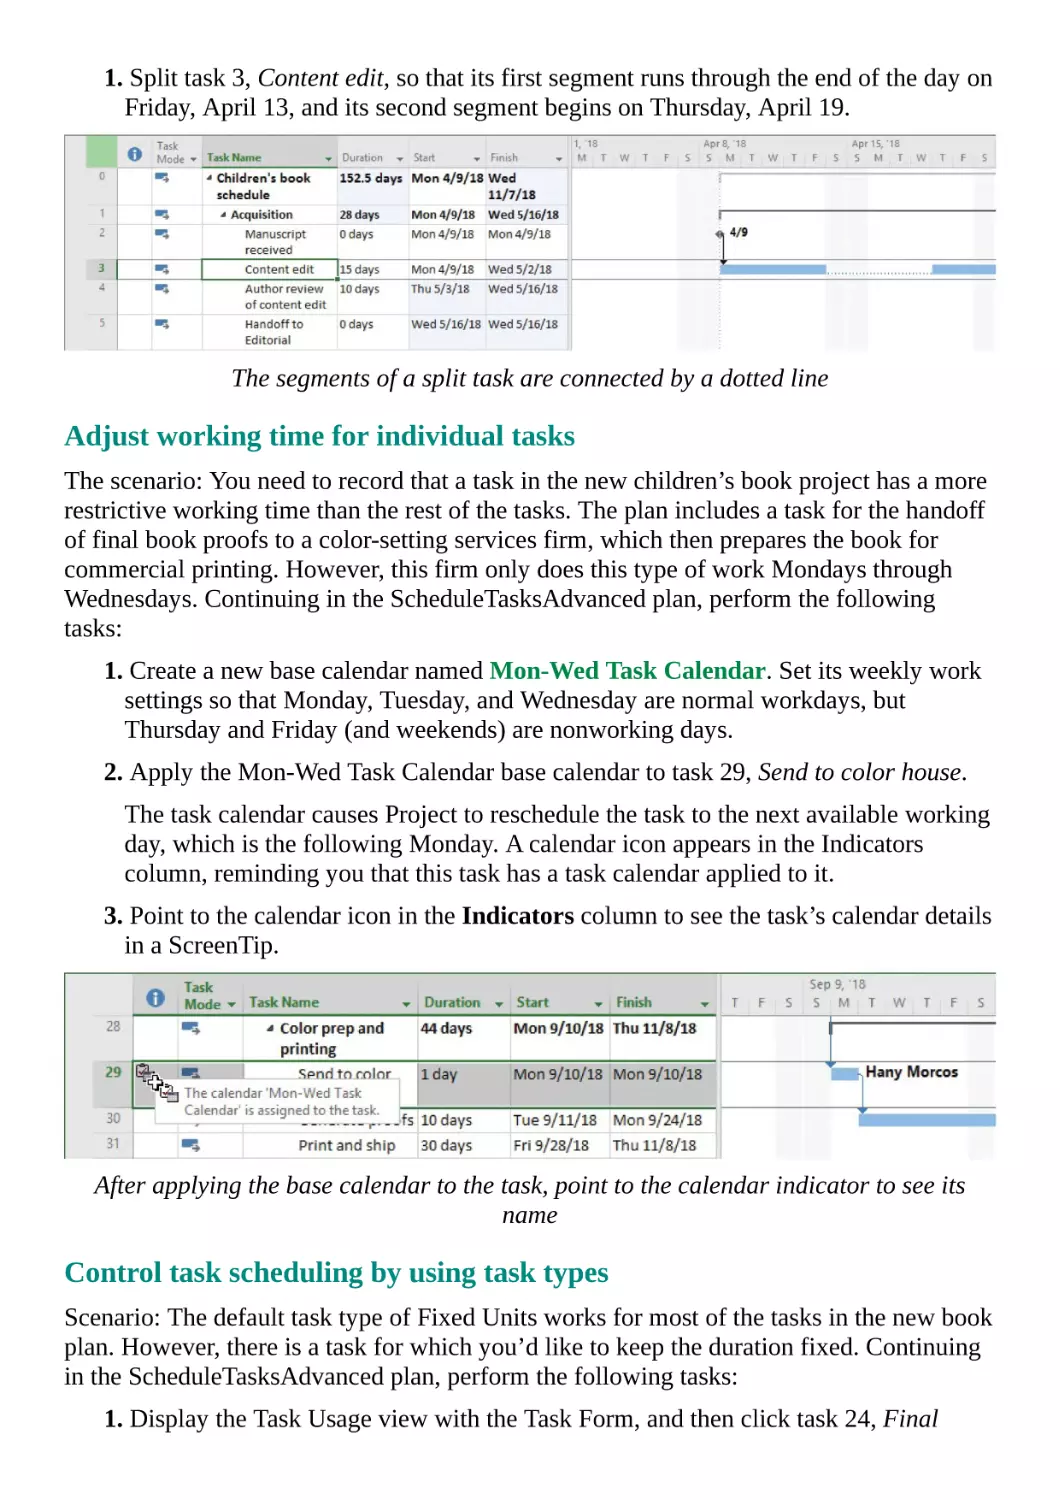 Adjust working time for individual tasks
Control task scheduling by using task types